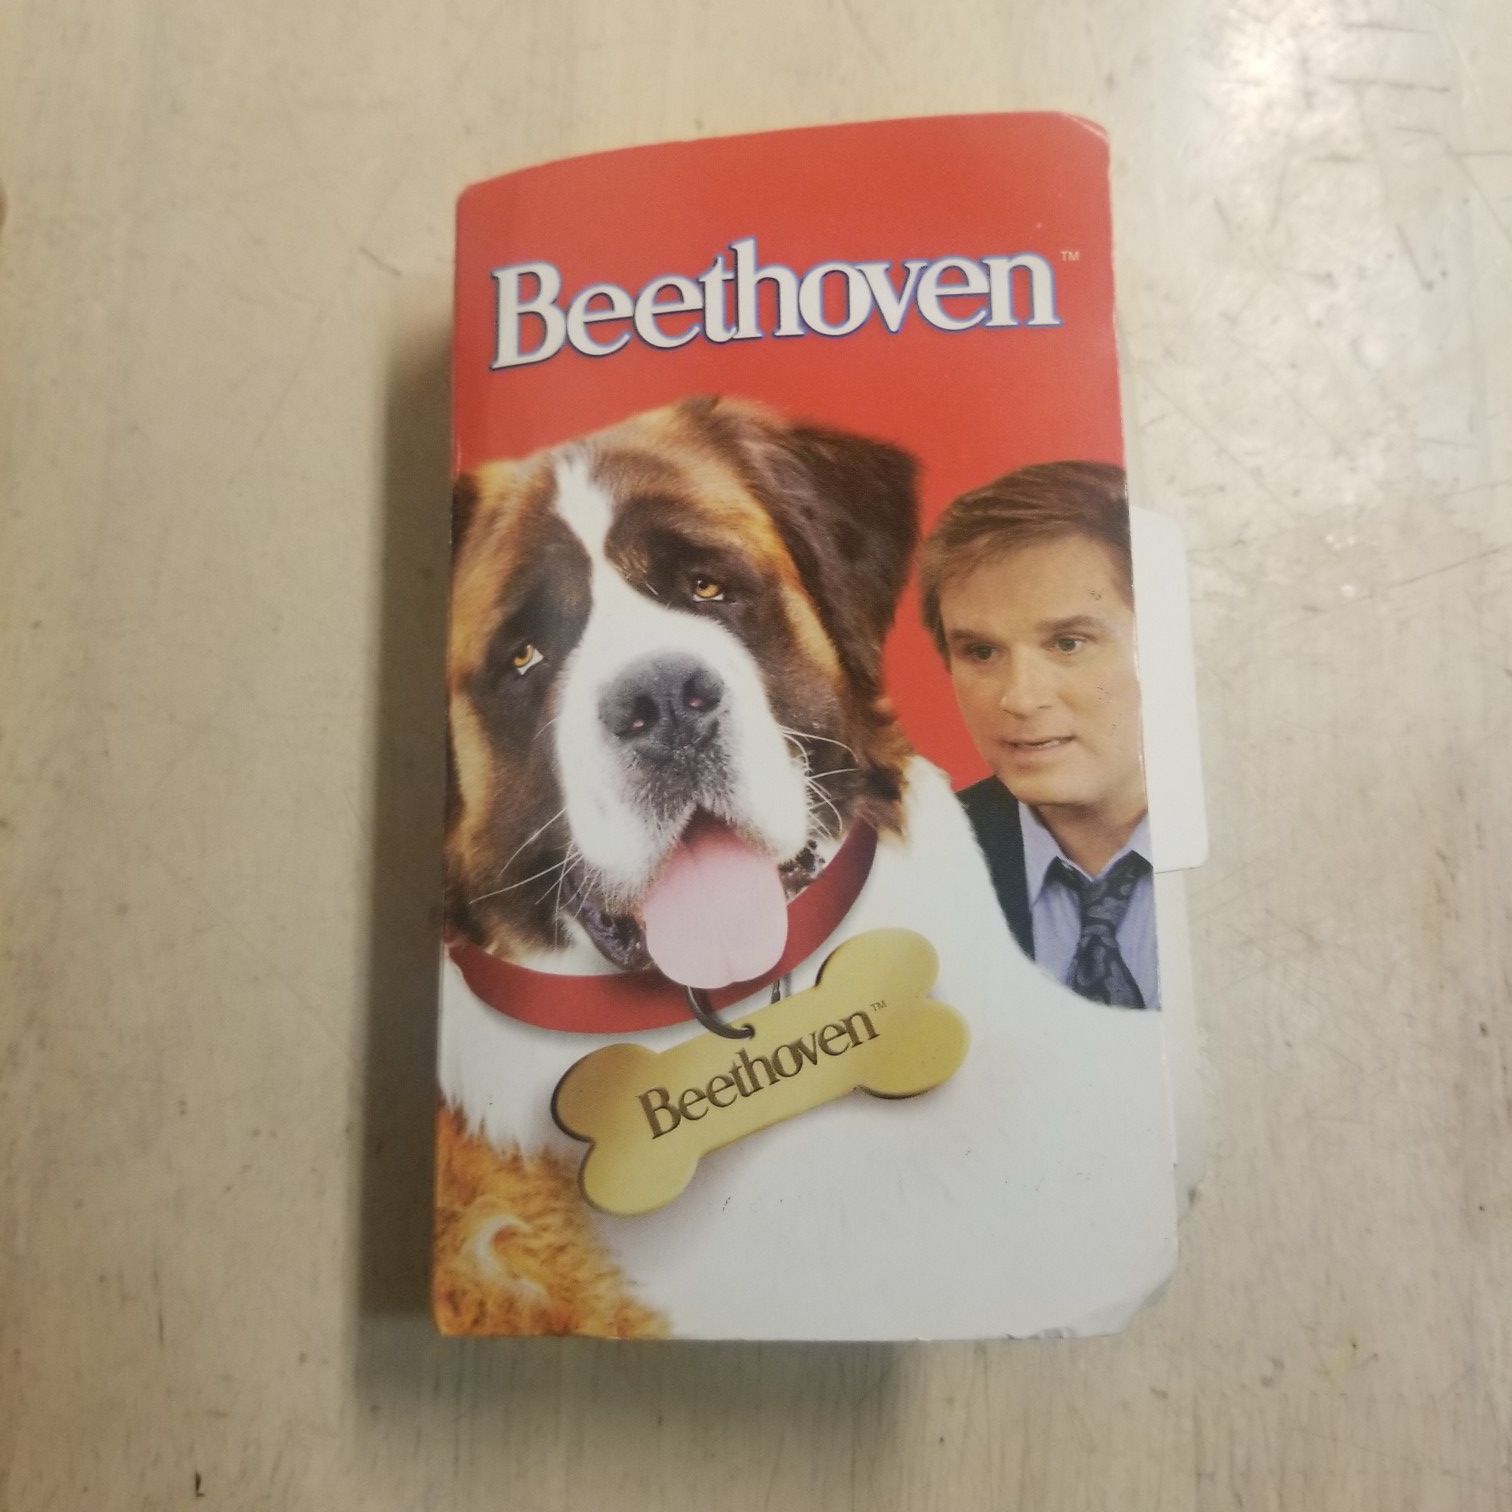 2005 Beethoven the package of plastic bone pieces is still sealed.